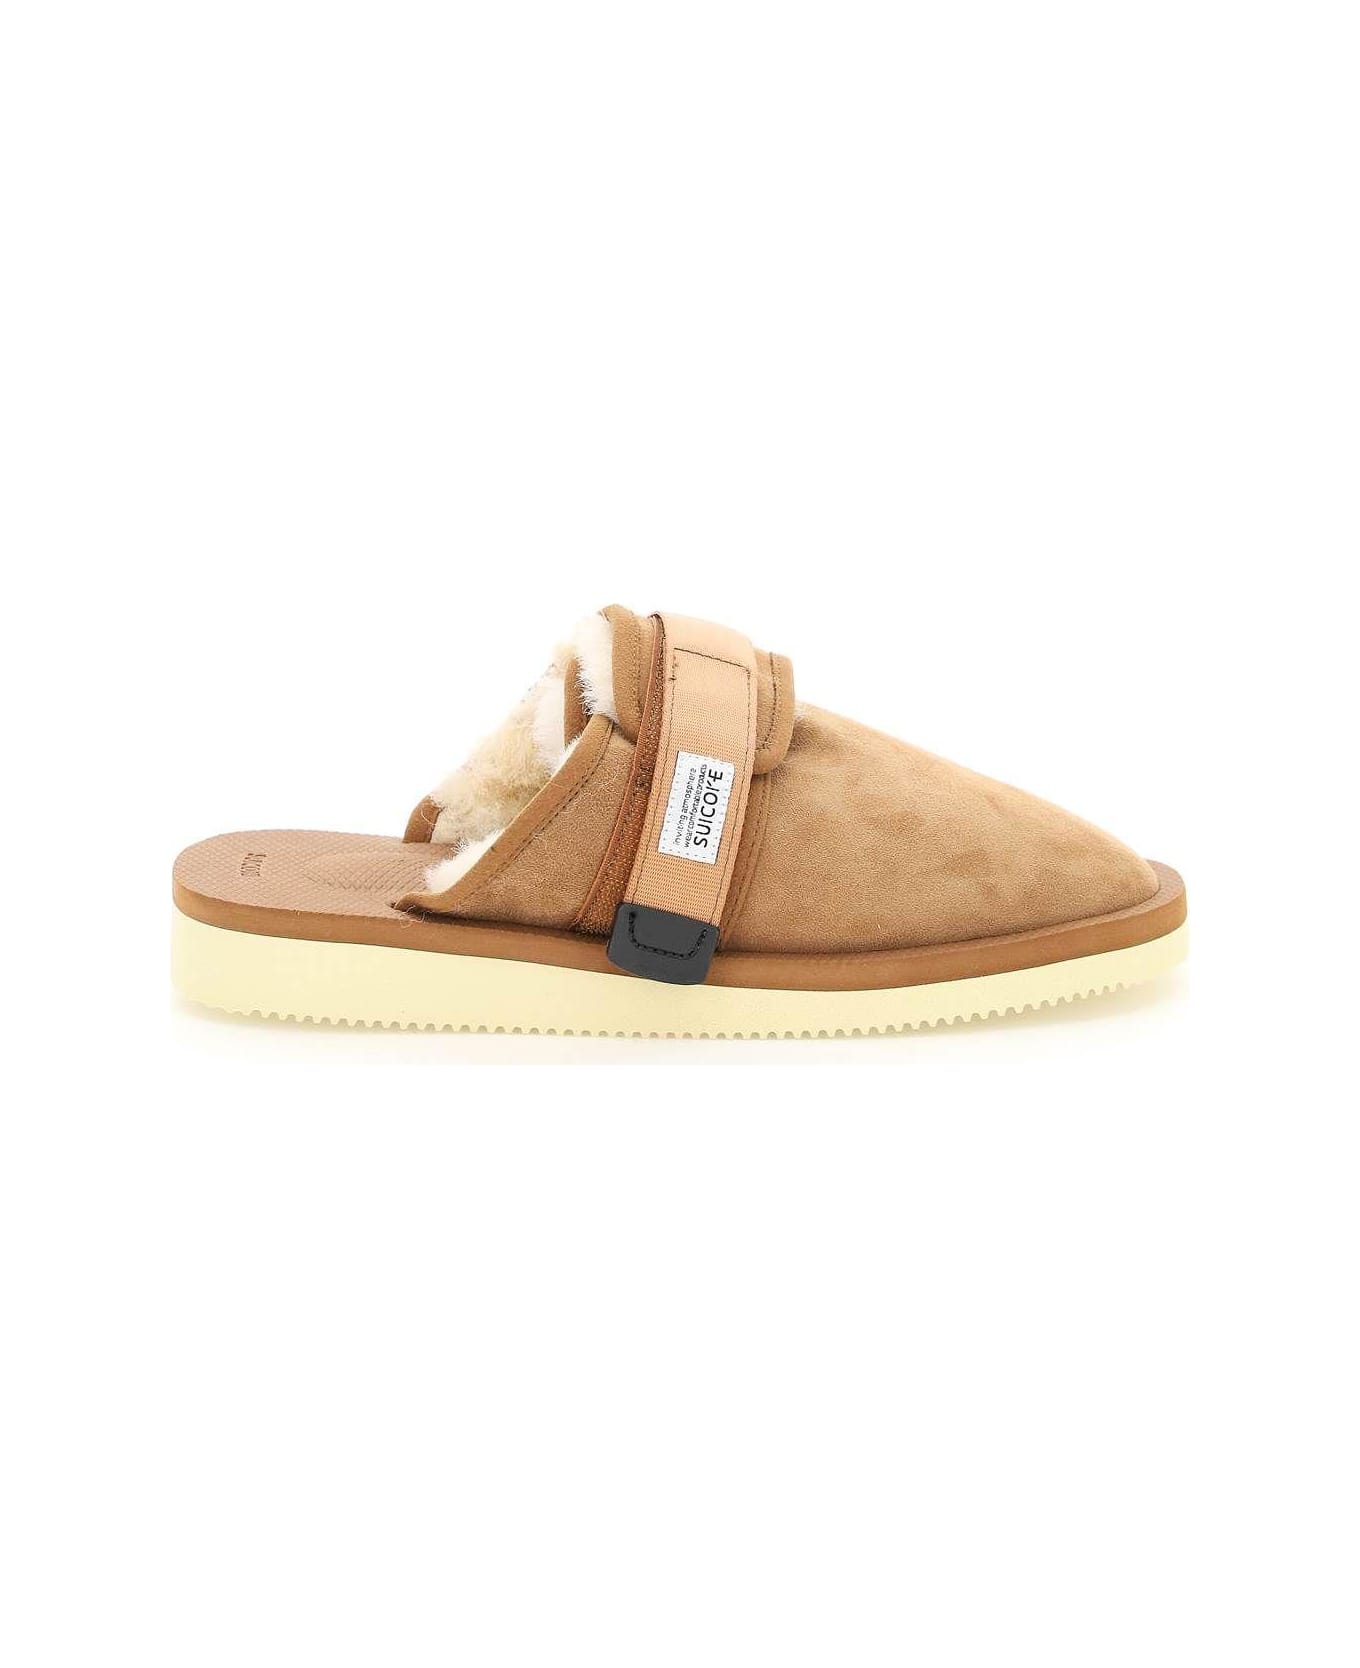 SUICOKE Zavo Suede Sabot With Shearling - BROWN